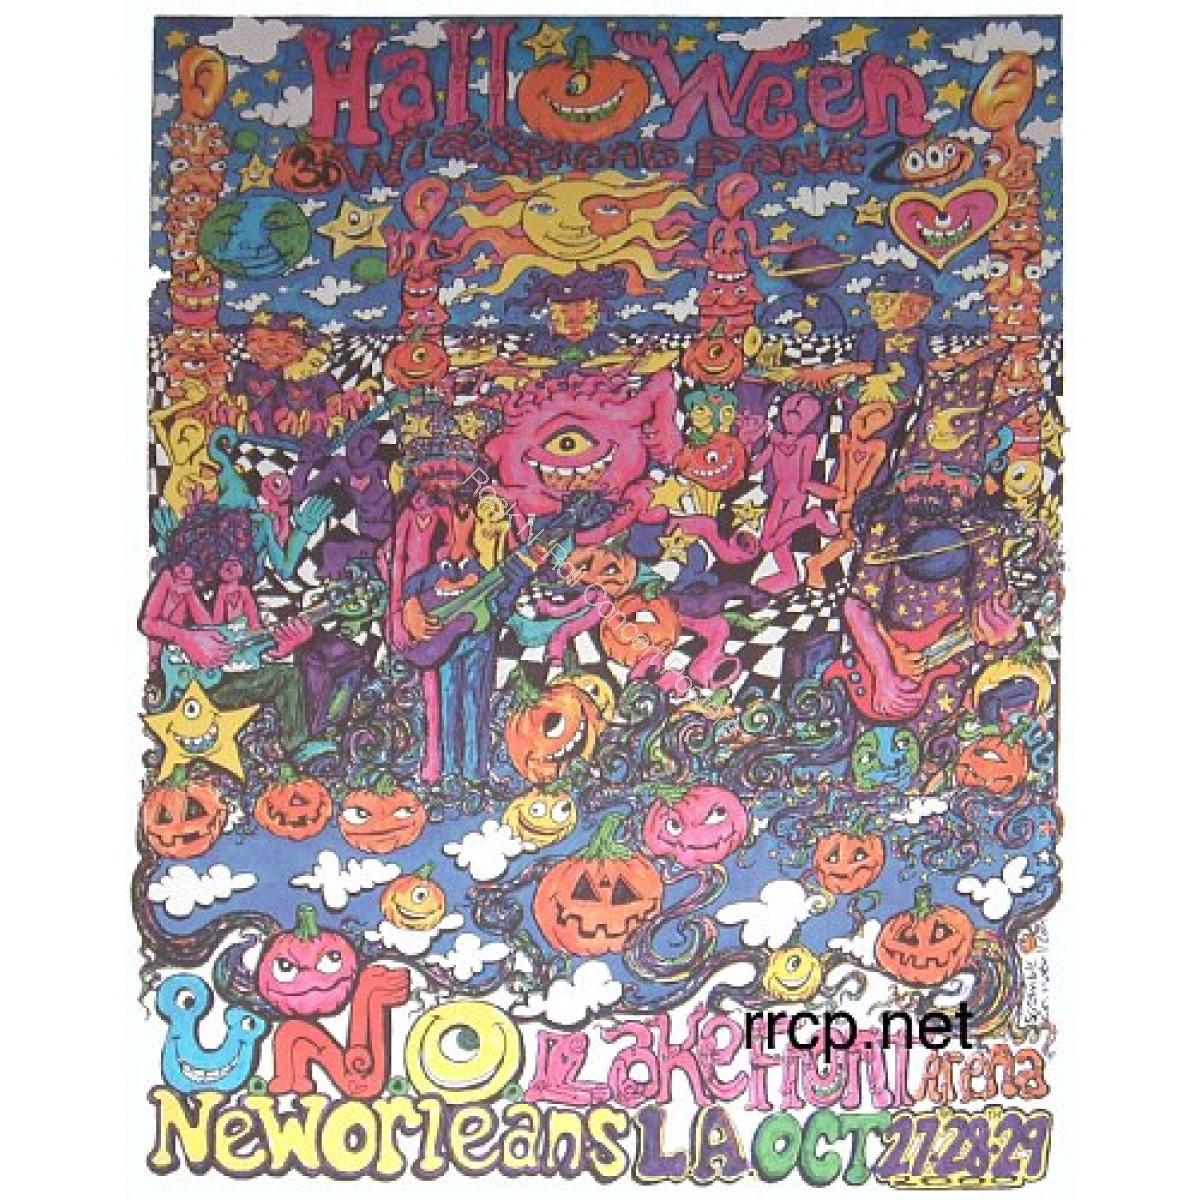 Widespread Panic 10/27-29/00 New Orleans LA. Official 3D poster by Scramble Campbell